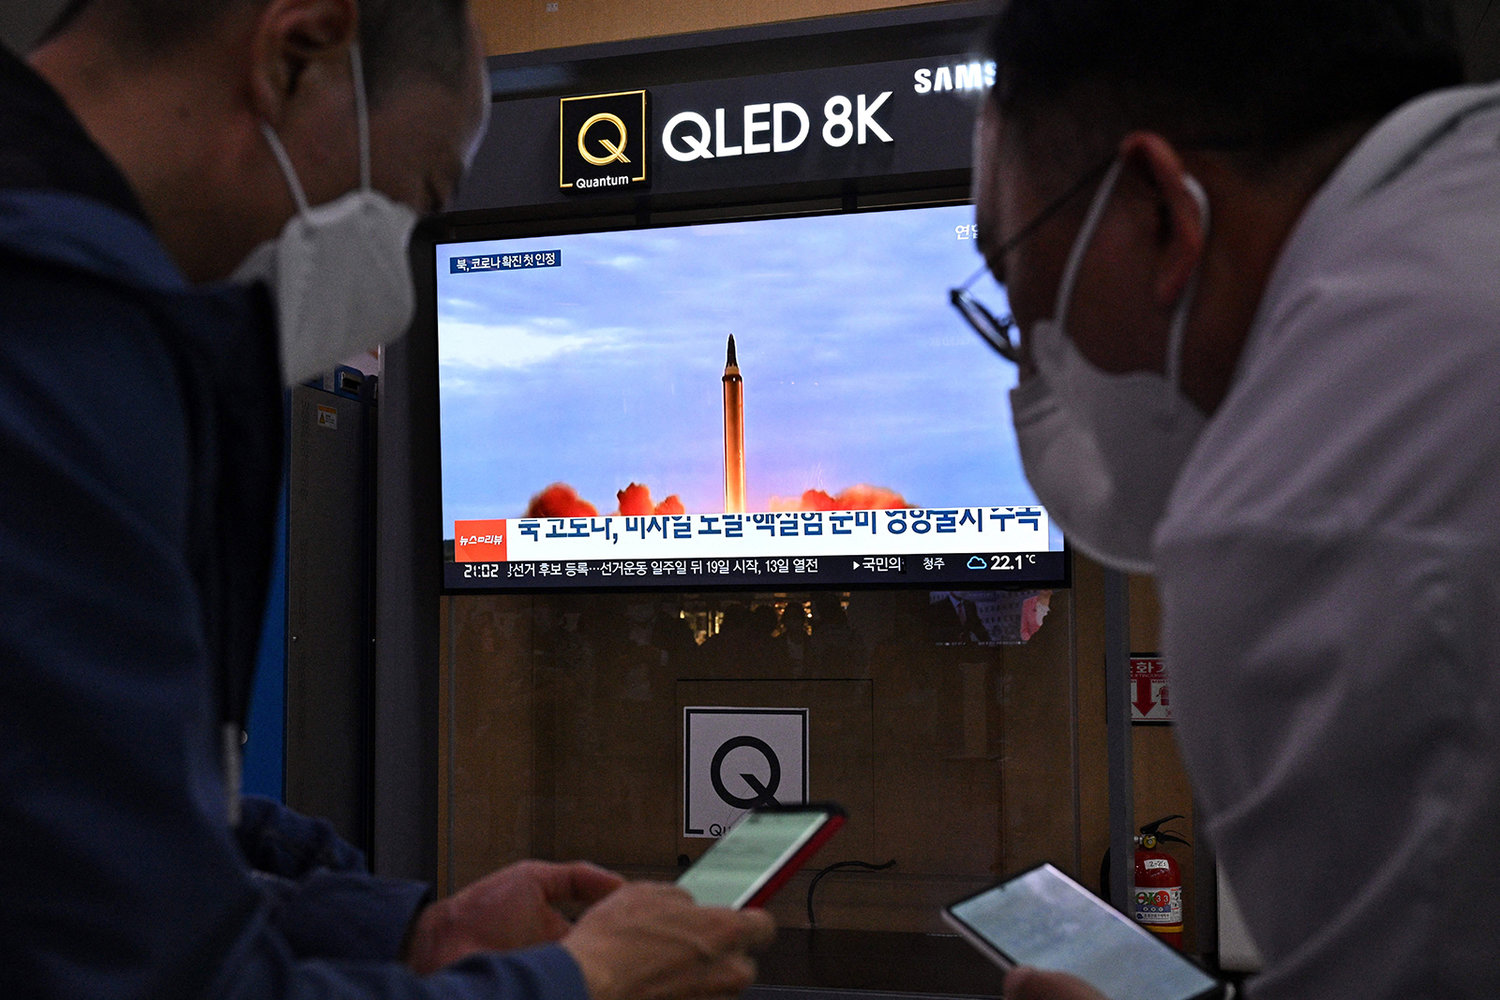 Two men check their phones as a television screen shows file footage of a North Korean missile test during a news broadcast in Seoul on May 12, 2022, after Seoul's military said it had detected three short-range ballistic missiles fired from near Pyongyang. (Anthony Wallace/AFP via Getty Images/TNS)